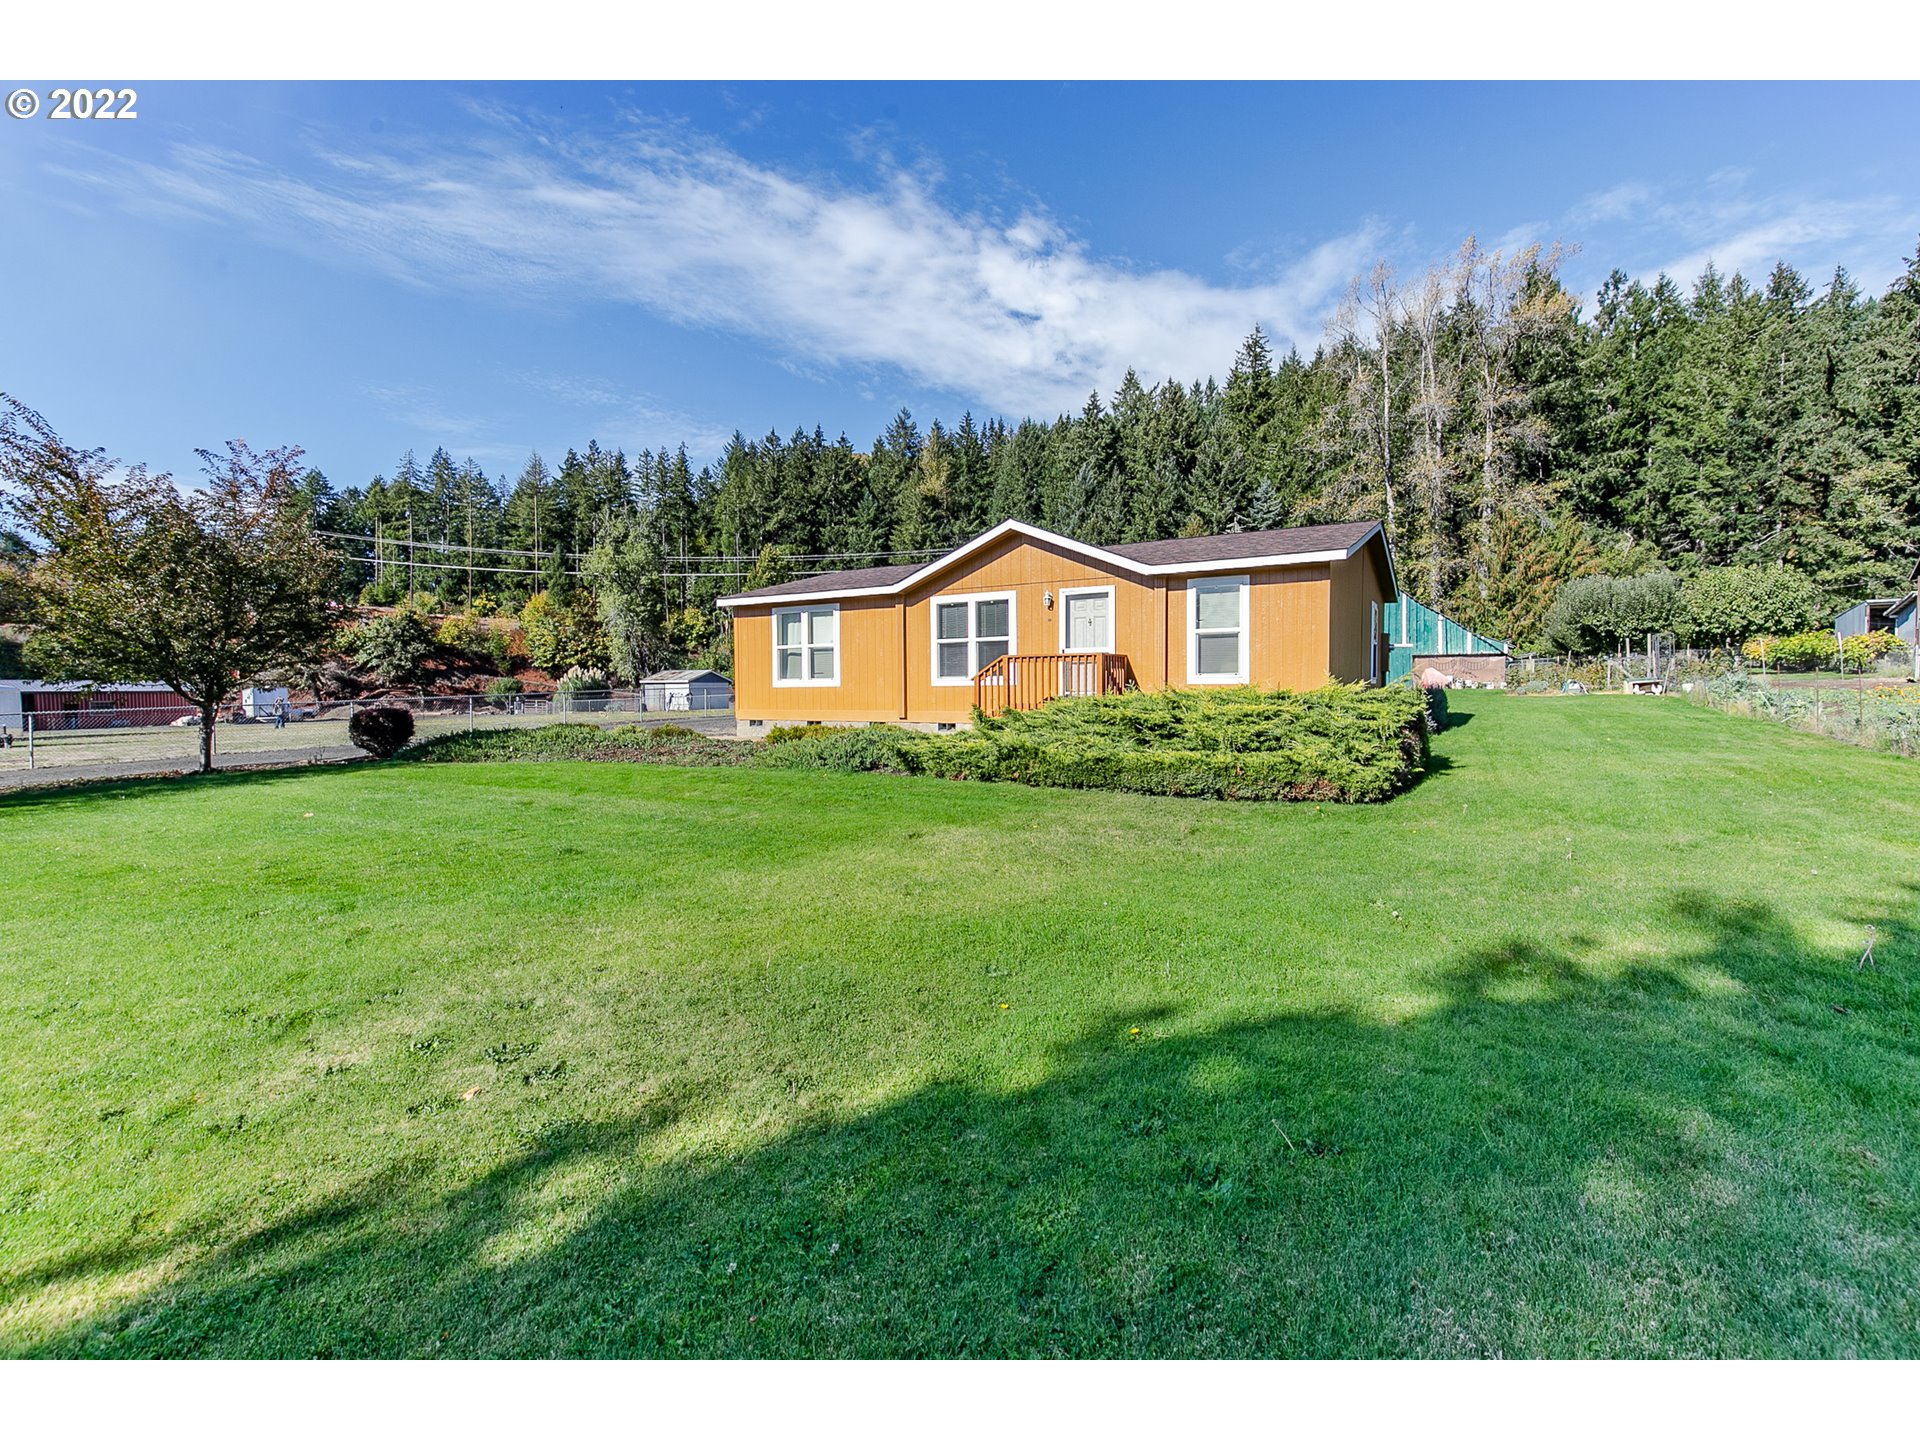 34785 ROW RIVER RD, Cottage Grove, OR 97424